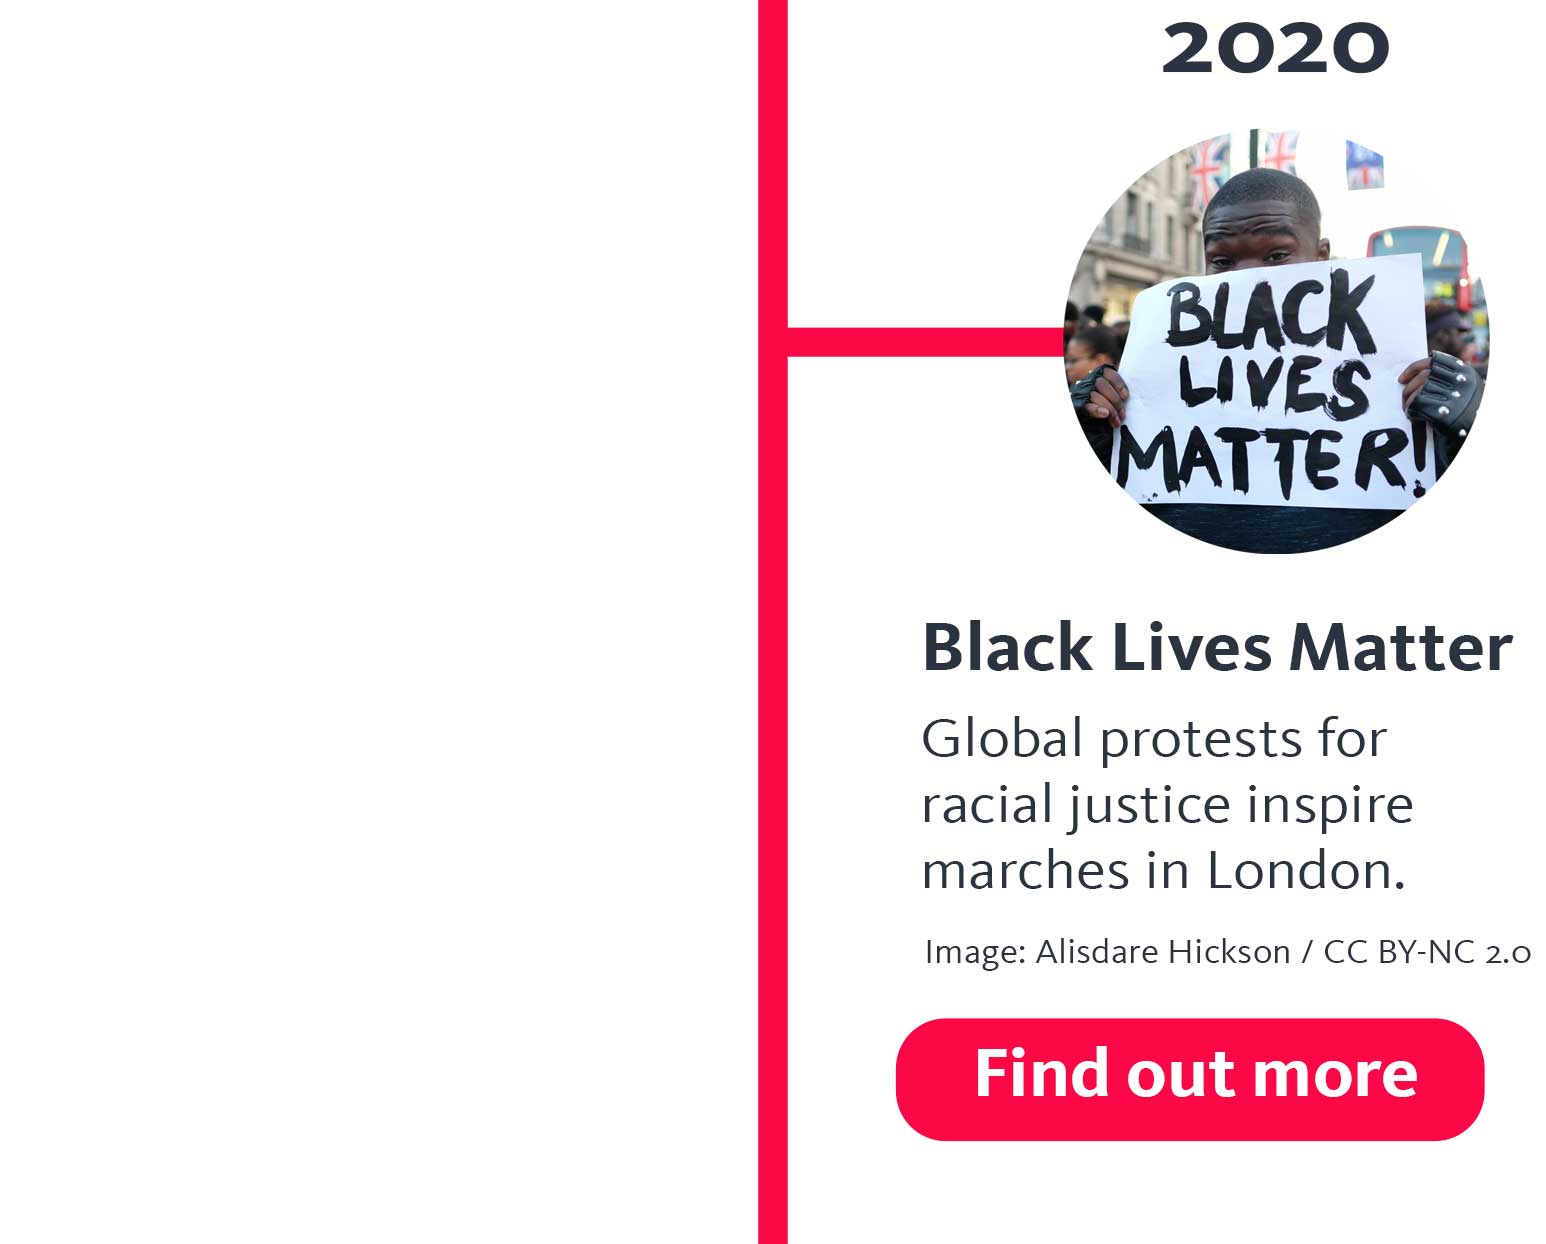 The year '2020' appears above a photo of a man holding up a sign with 'Black Lives Matter!' painted on it. A heading below says 'Black Lives Matter', and text below that says 'Global protests for racial justice inspire marches in London.' and below that, 'Image: Alisdare Hickson / CC BY-NC 2.0'. Below that, a button says 'Find out more'.